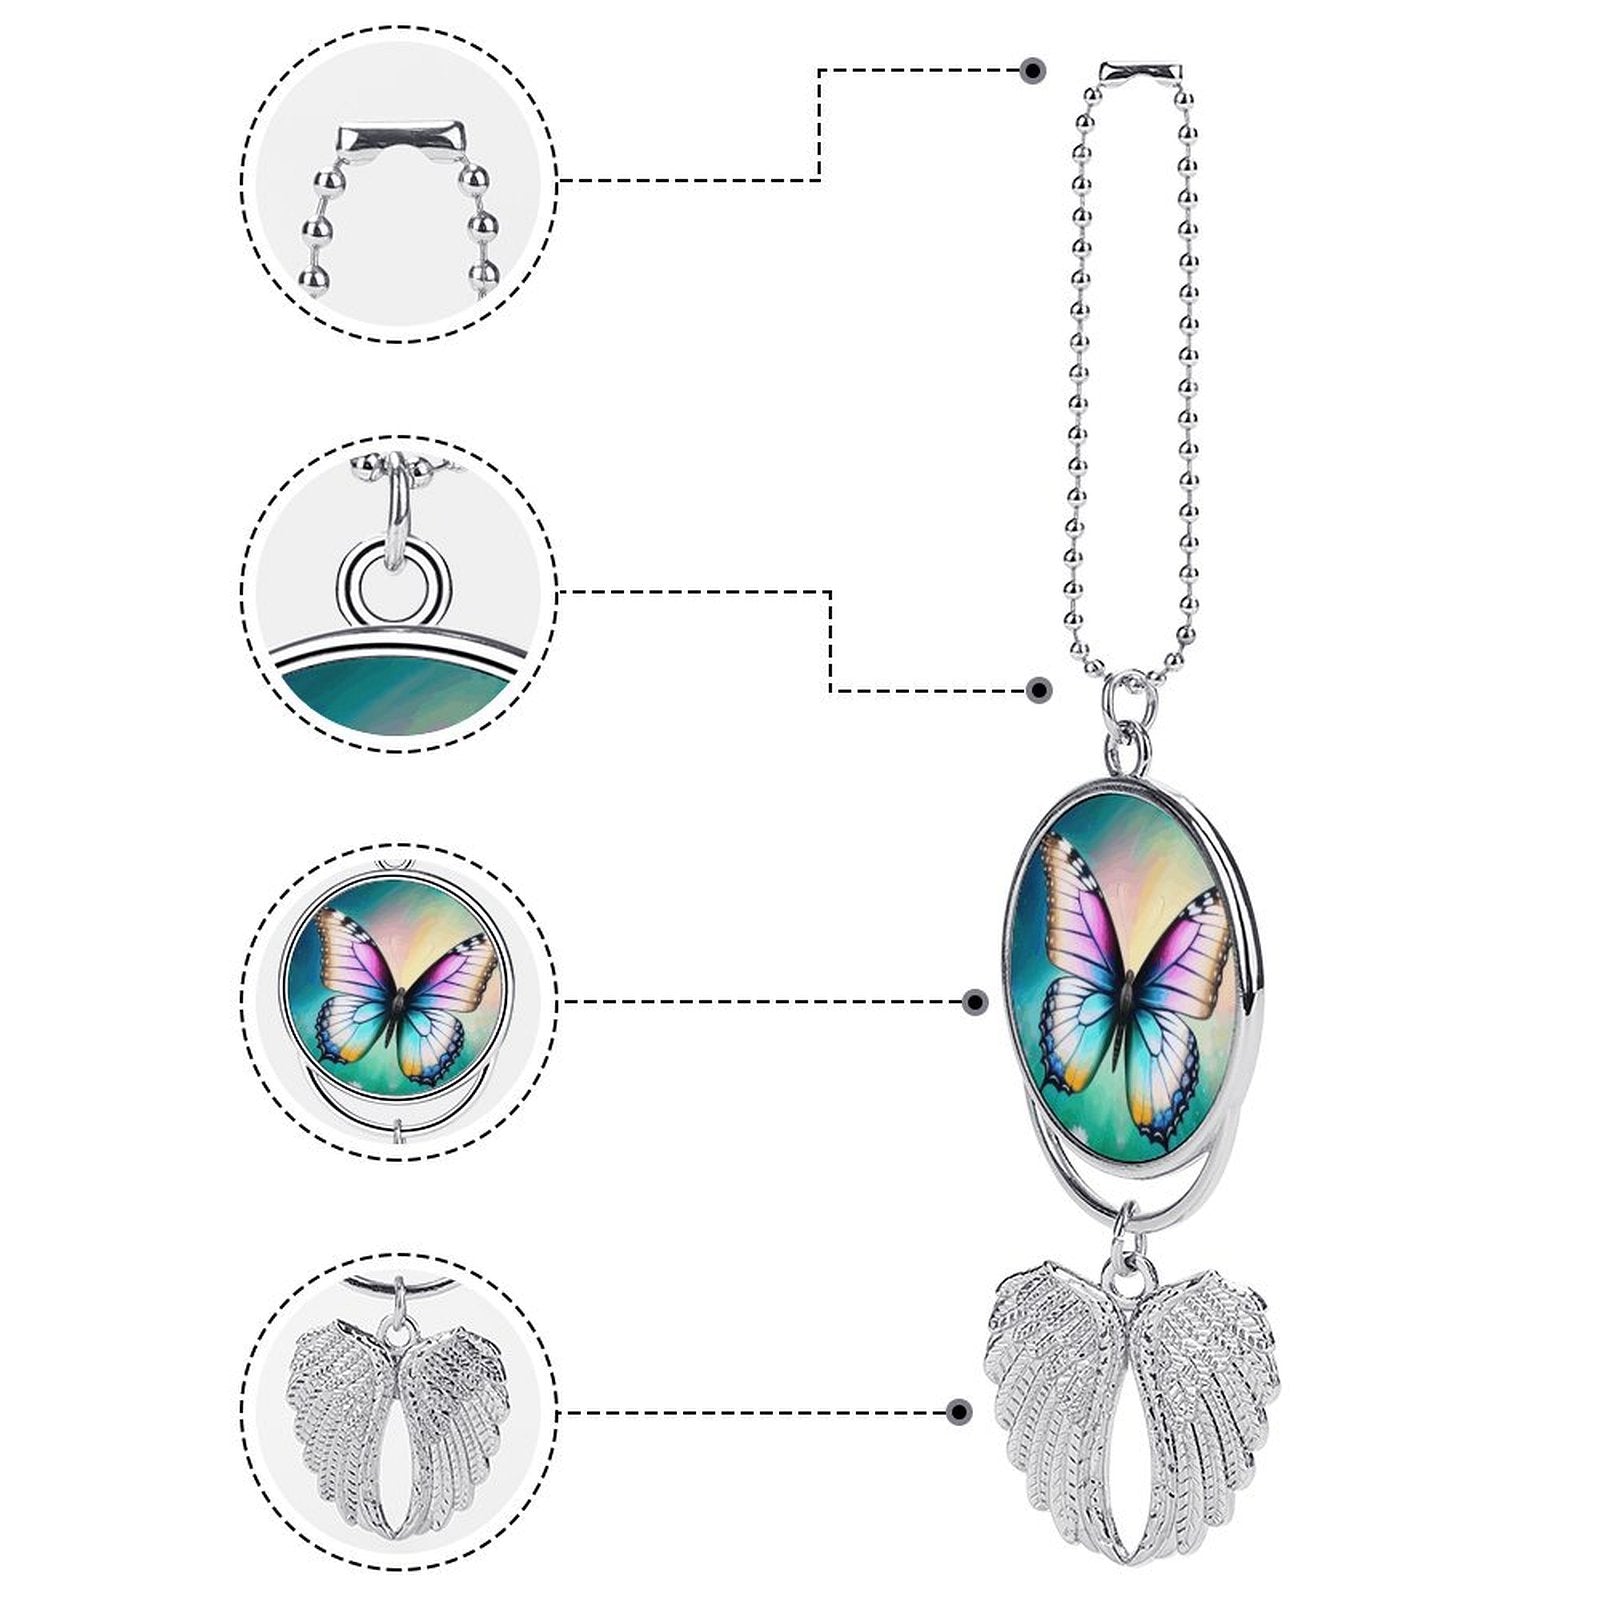 Beautiful Butterfly Zinc Alloy 2-sided Print Car Pendant with Wings